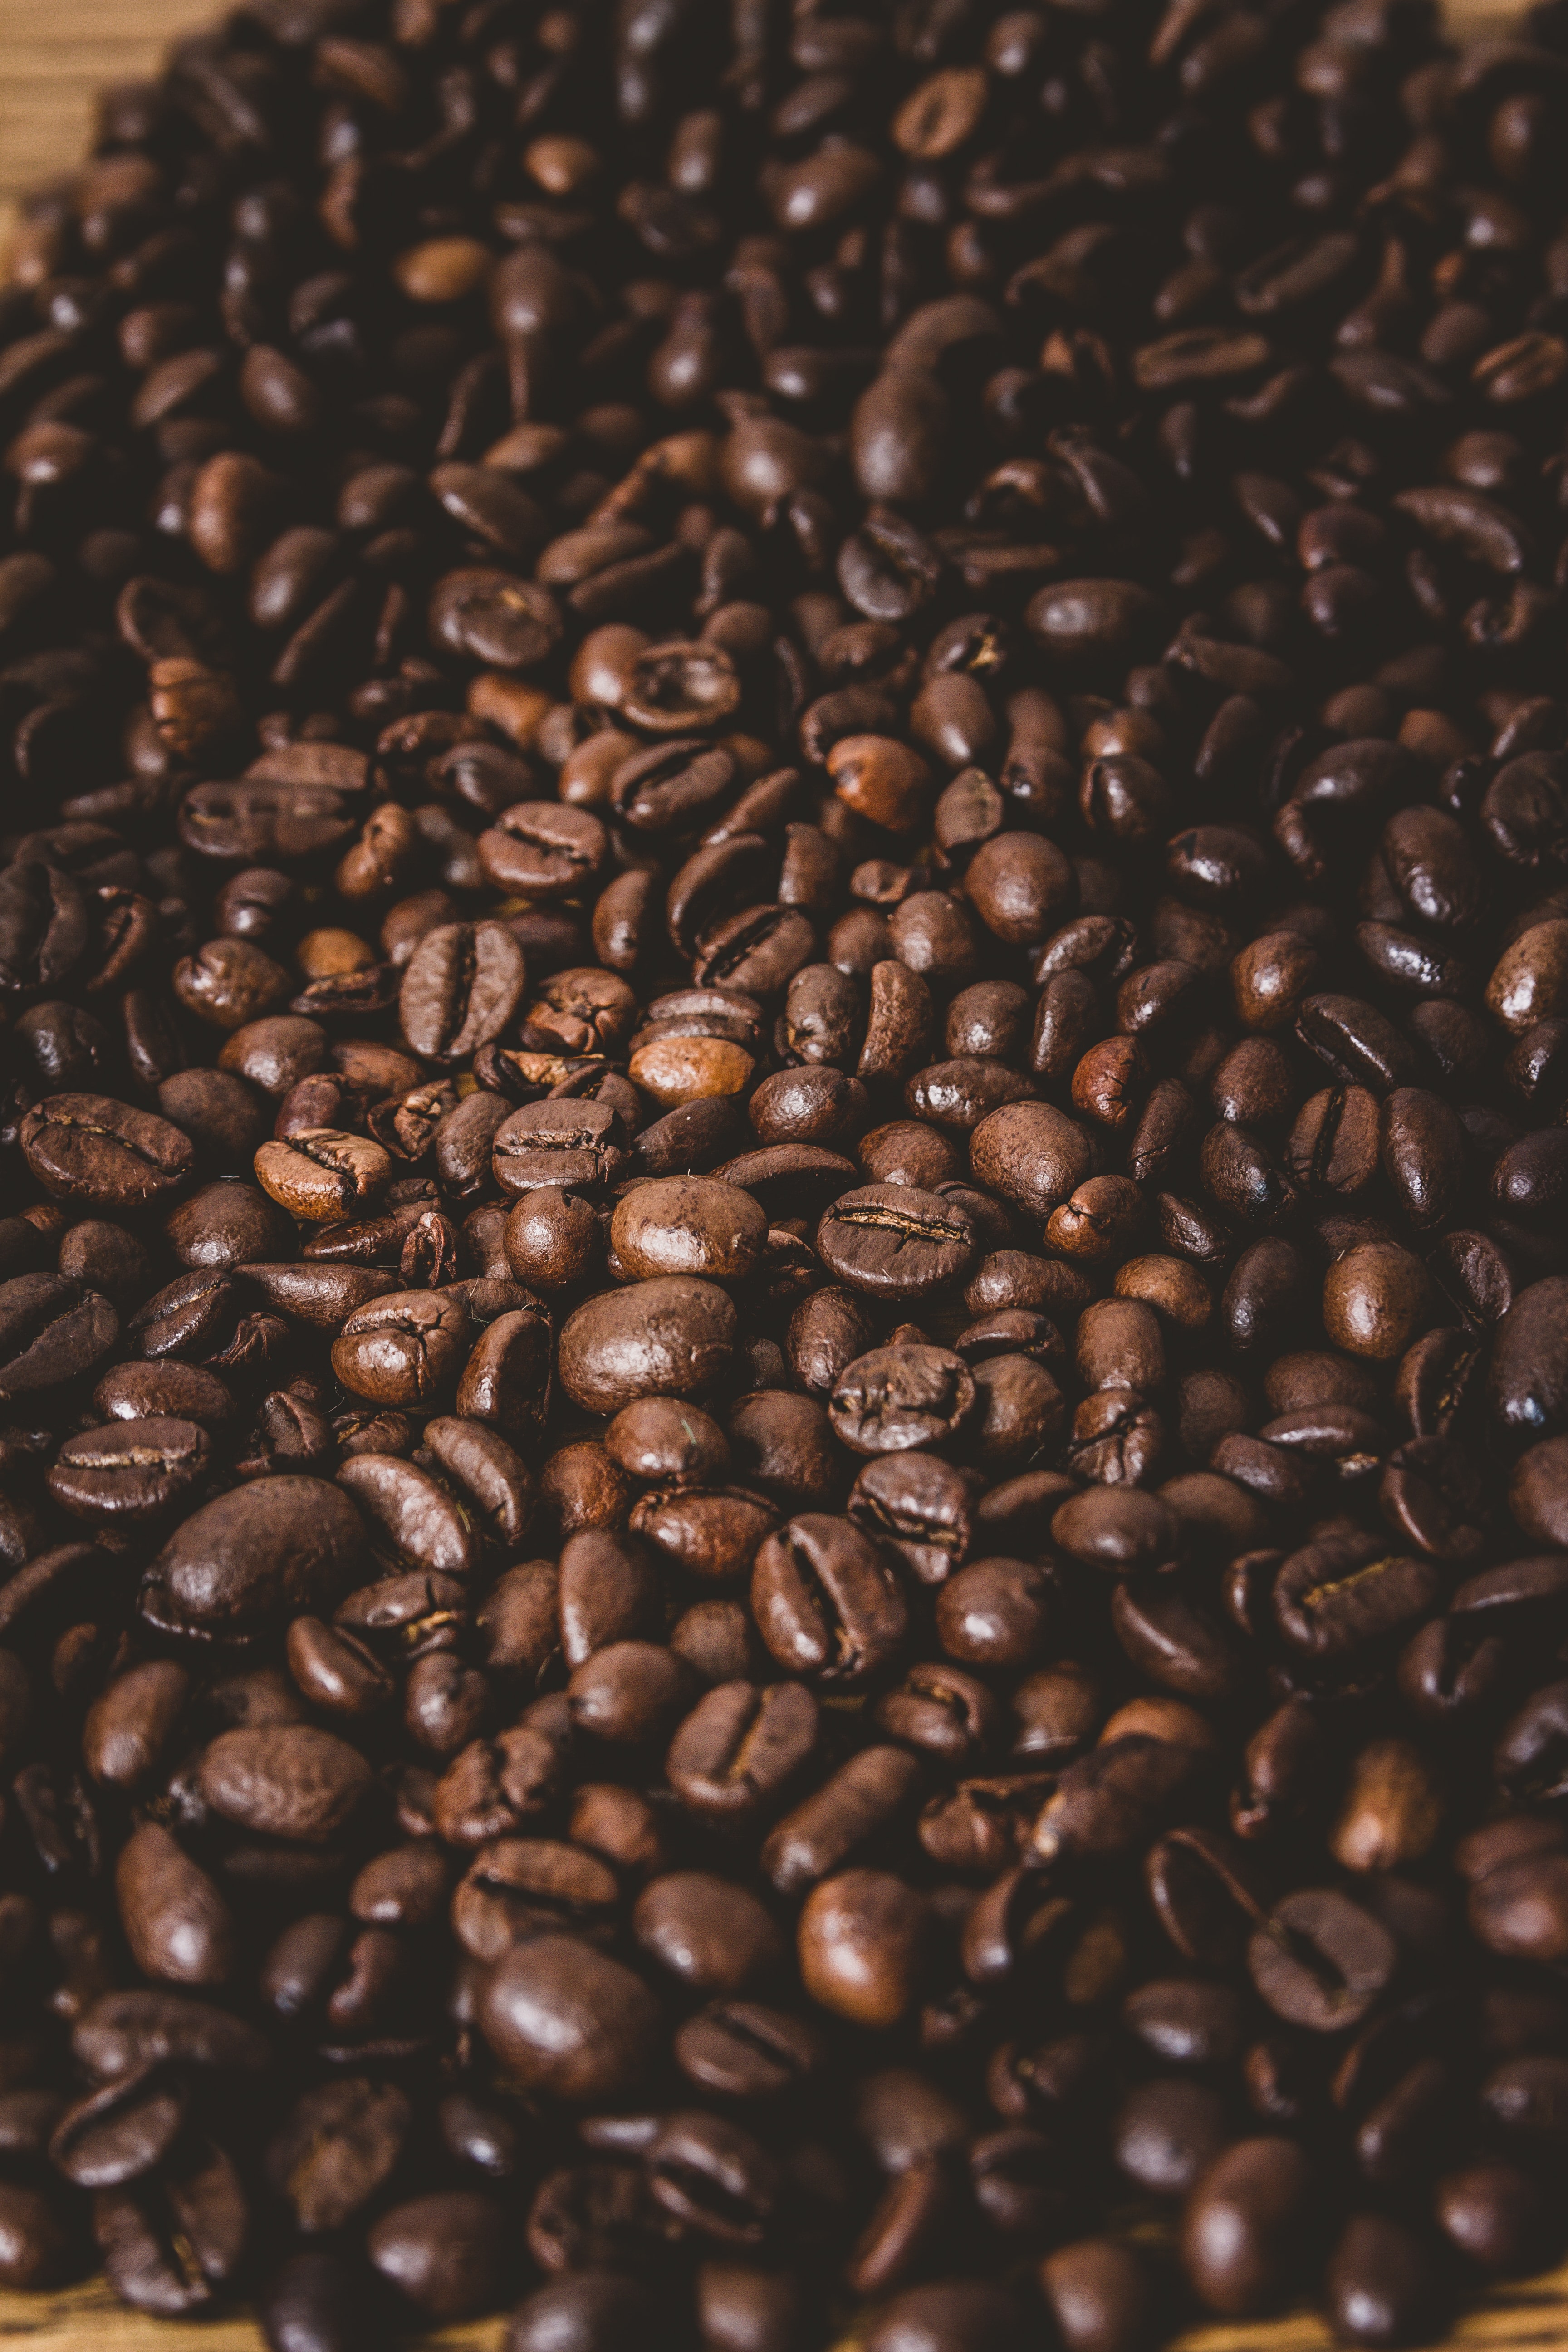 Popular Coffee Beans Image for Phone